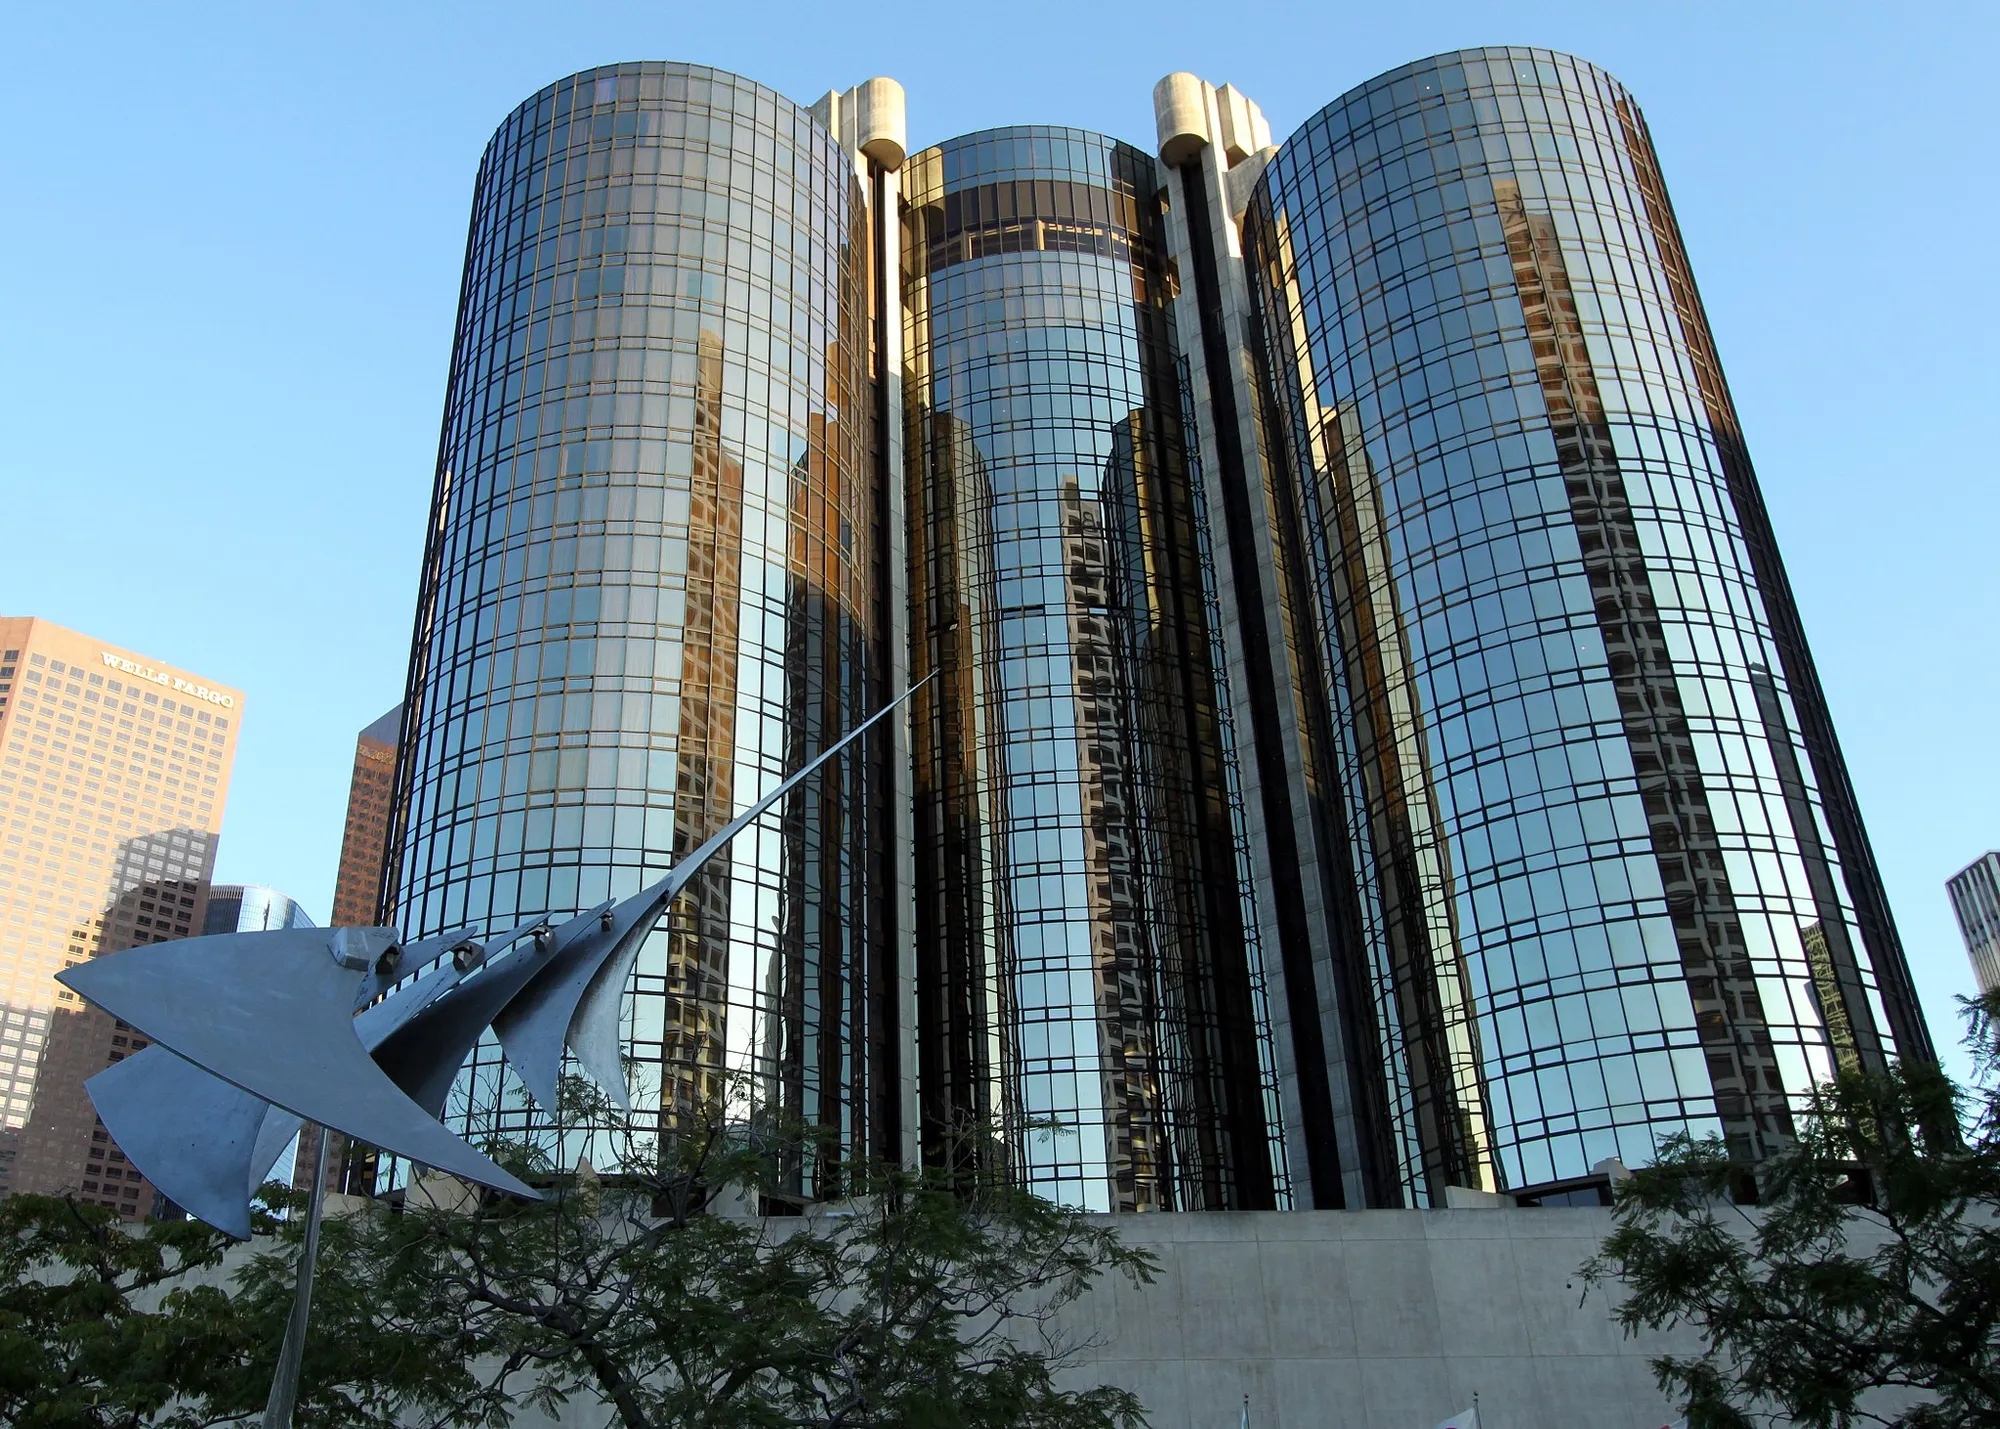 Exterior of the Westin Bonvanture Hotel in Los Angeles, discussed by Jameson as an example of postmodern architecture.